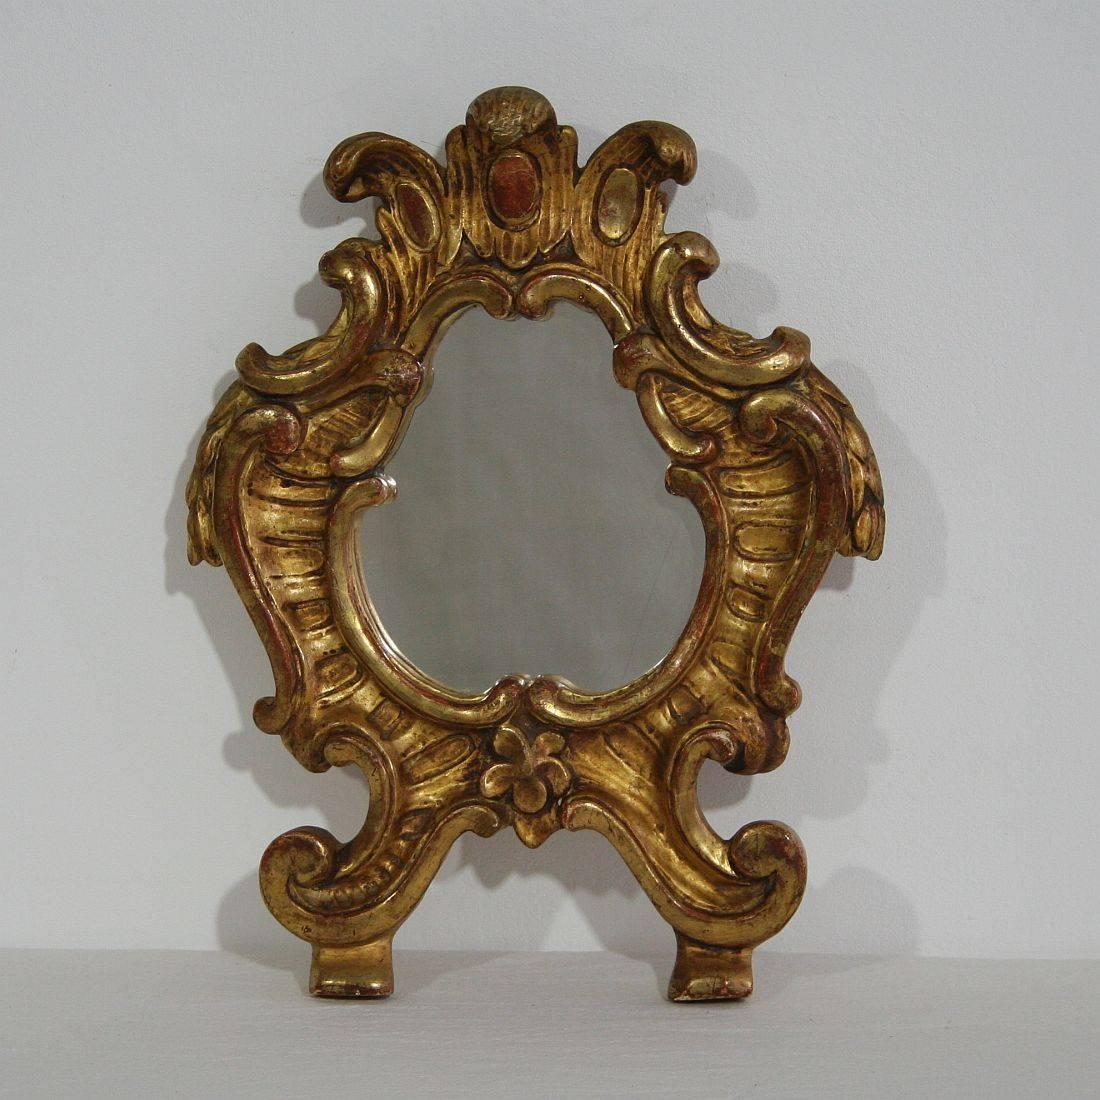 Very well carved giltwood Baroque mirror. Gorgeous small piece.
Italy, circa 1850-1900. Mirror glass of later date.
 